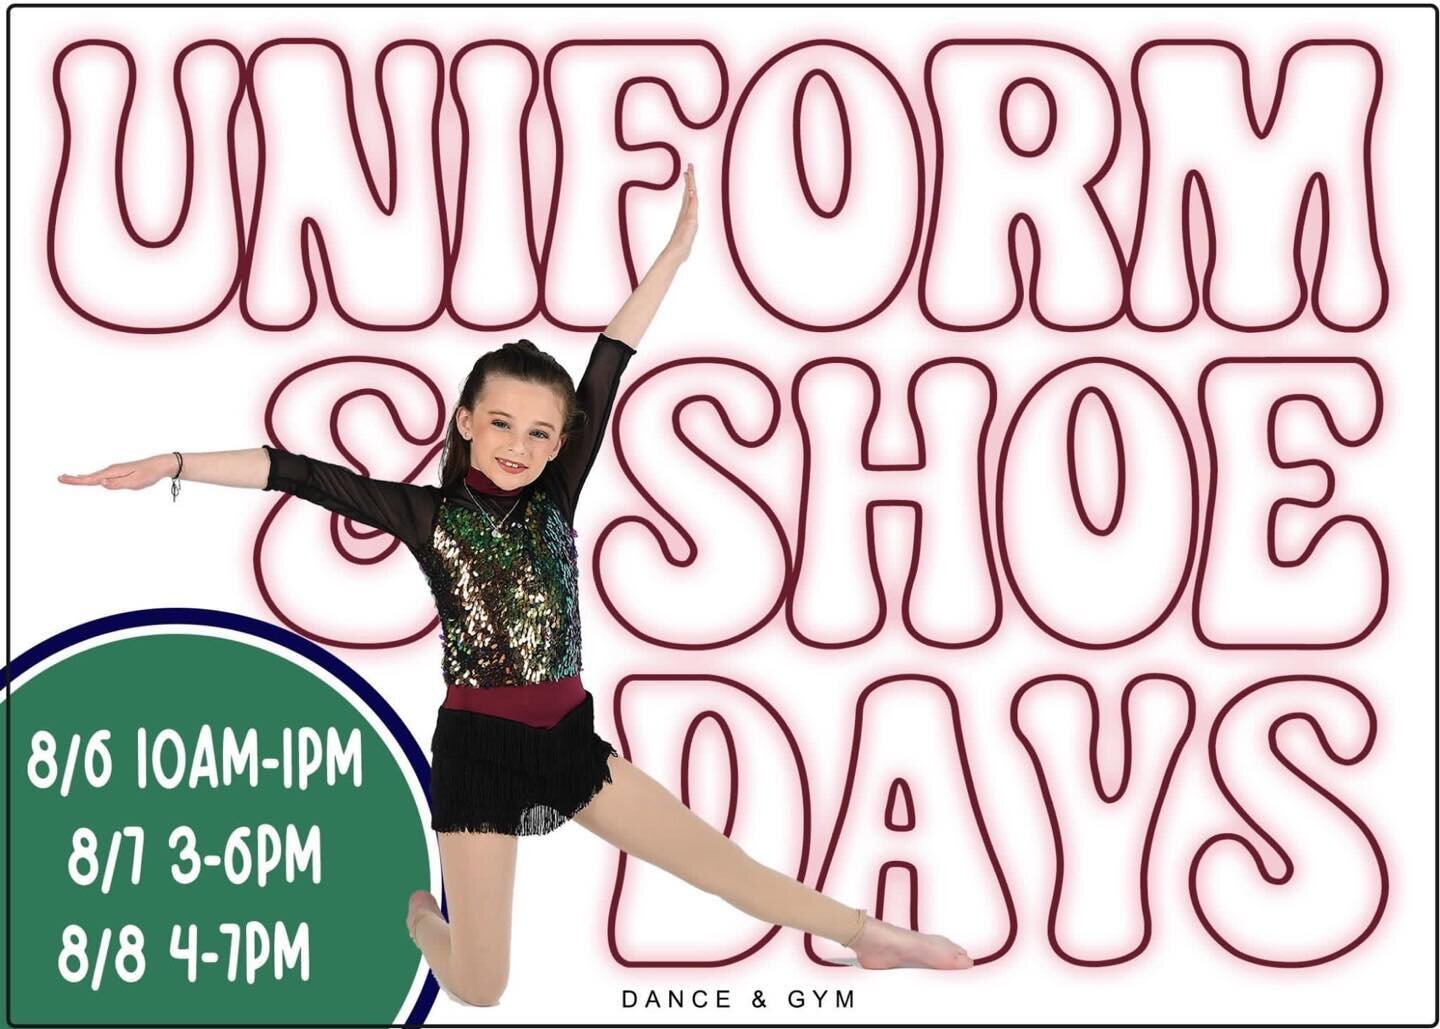 ✨Just a reminder - Uniform &amp; Shoe Days start this weekend.✨ 
⭐️Come in Saturday 8/6 from 10am-1pm, Sunday 8/7 from 3-6pm or Monday 8/8 from 4-7pm to try on shoes and uniform pieces and place your order. ❤️We'll also have some discount items for f